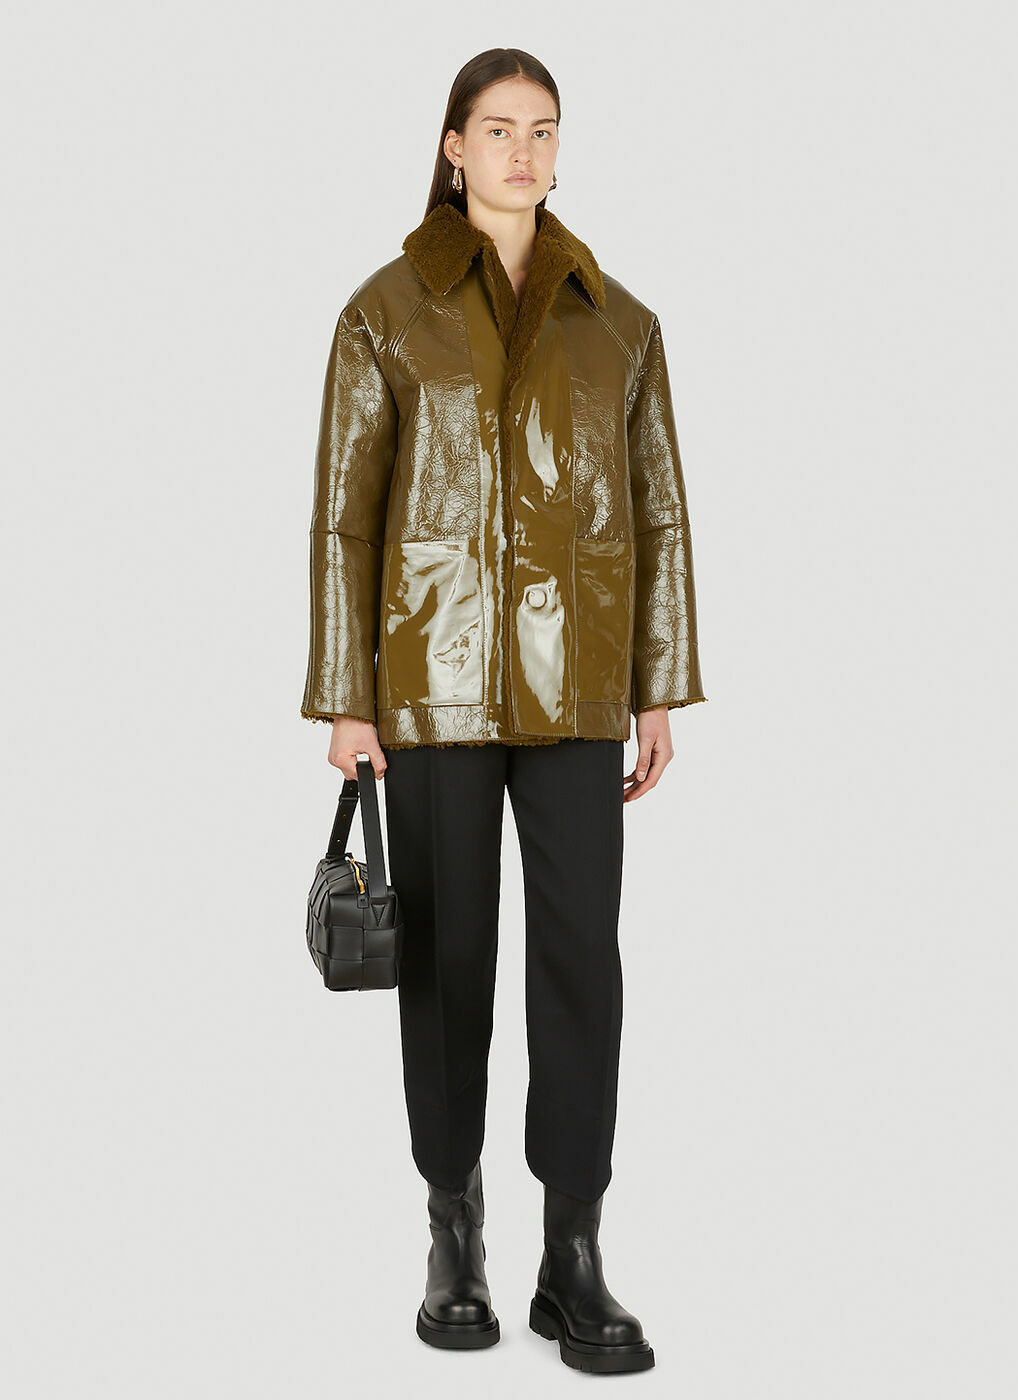 Original Lacquer Jacket in Olive Kassl Editions